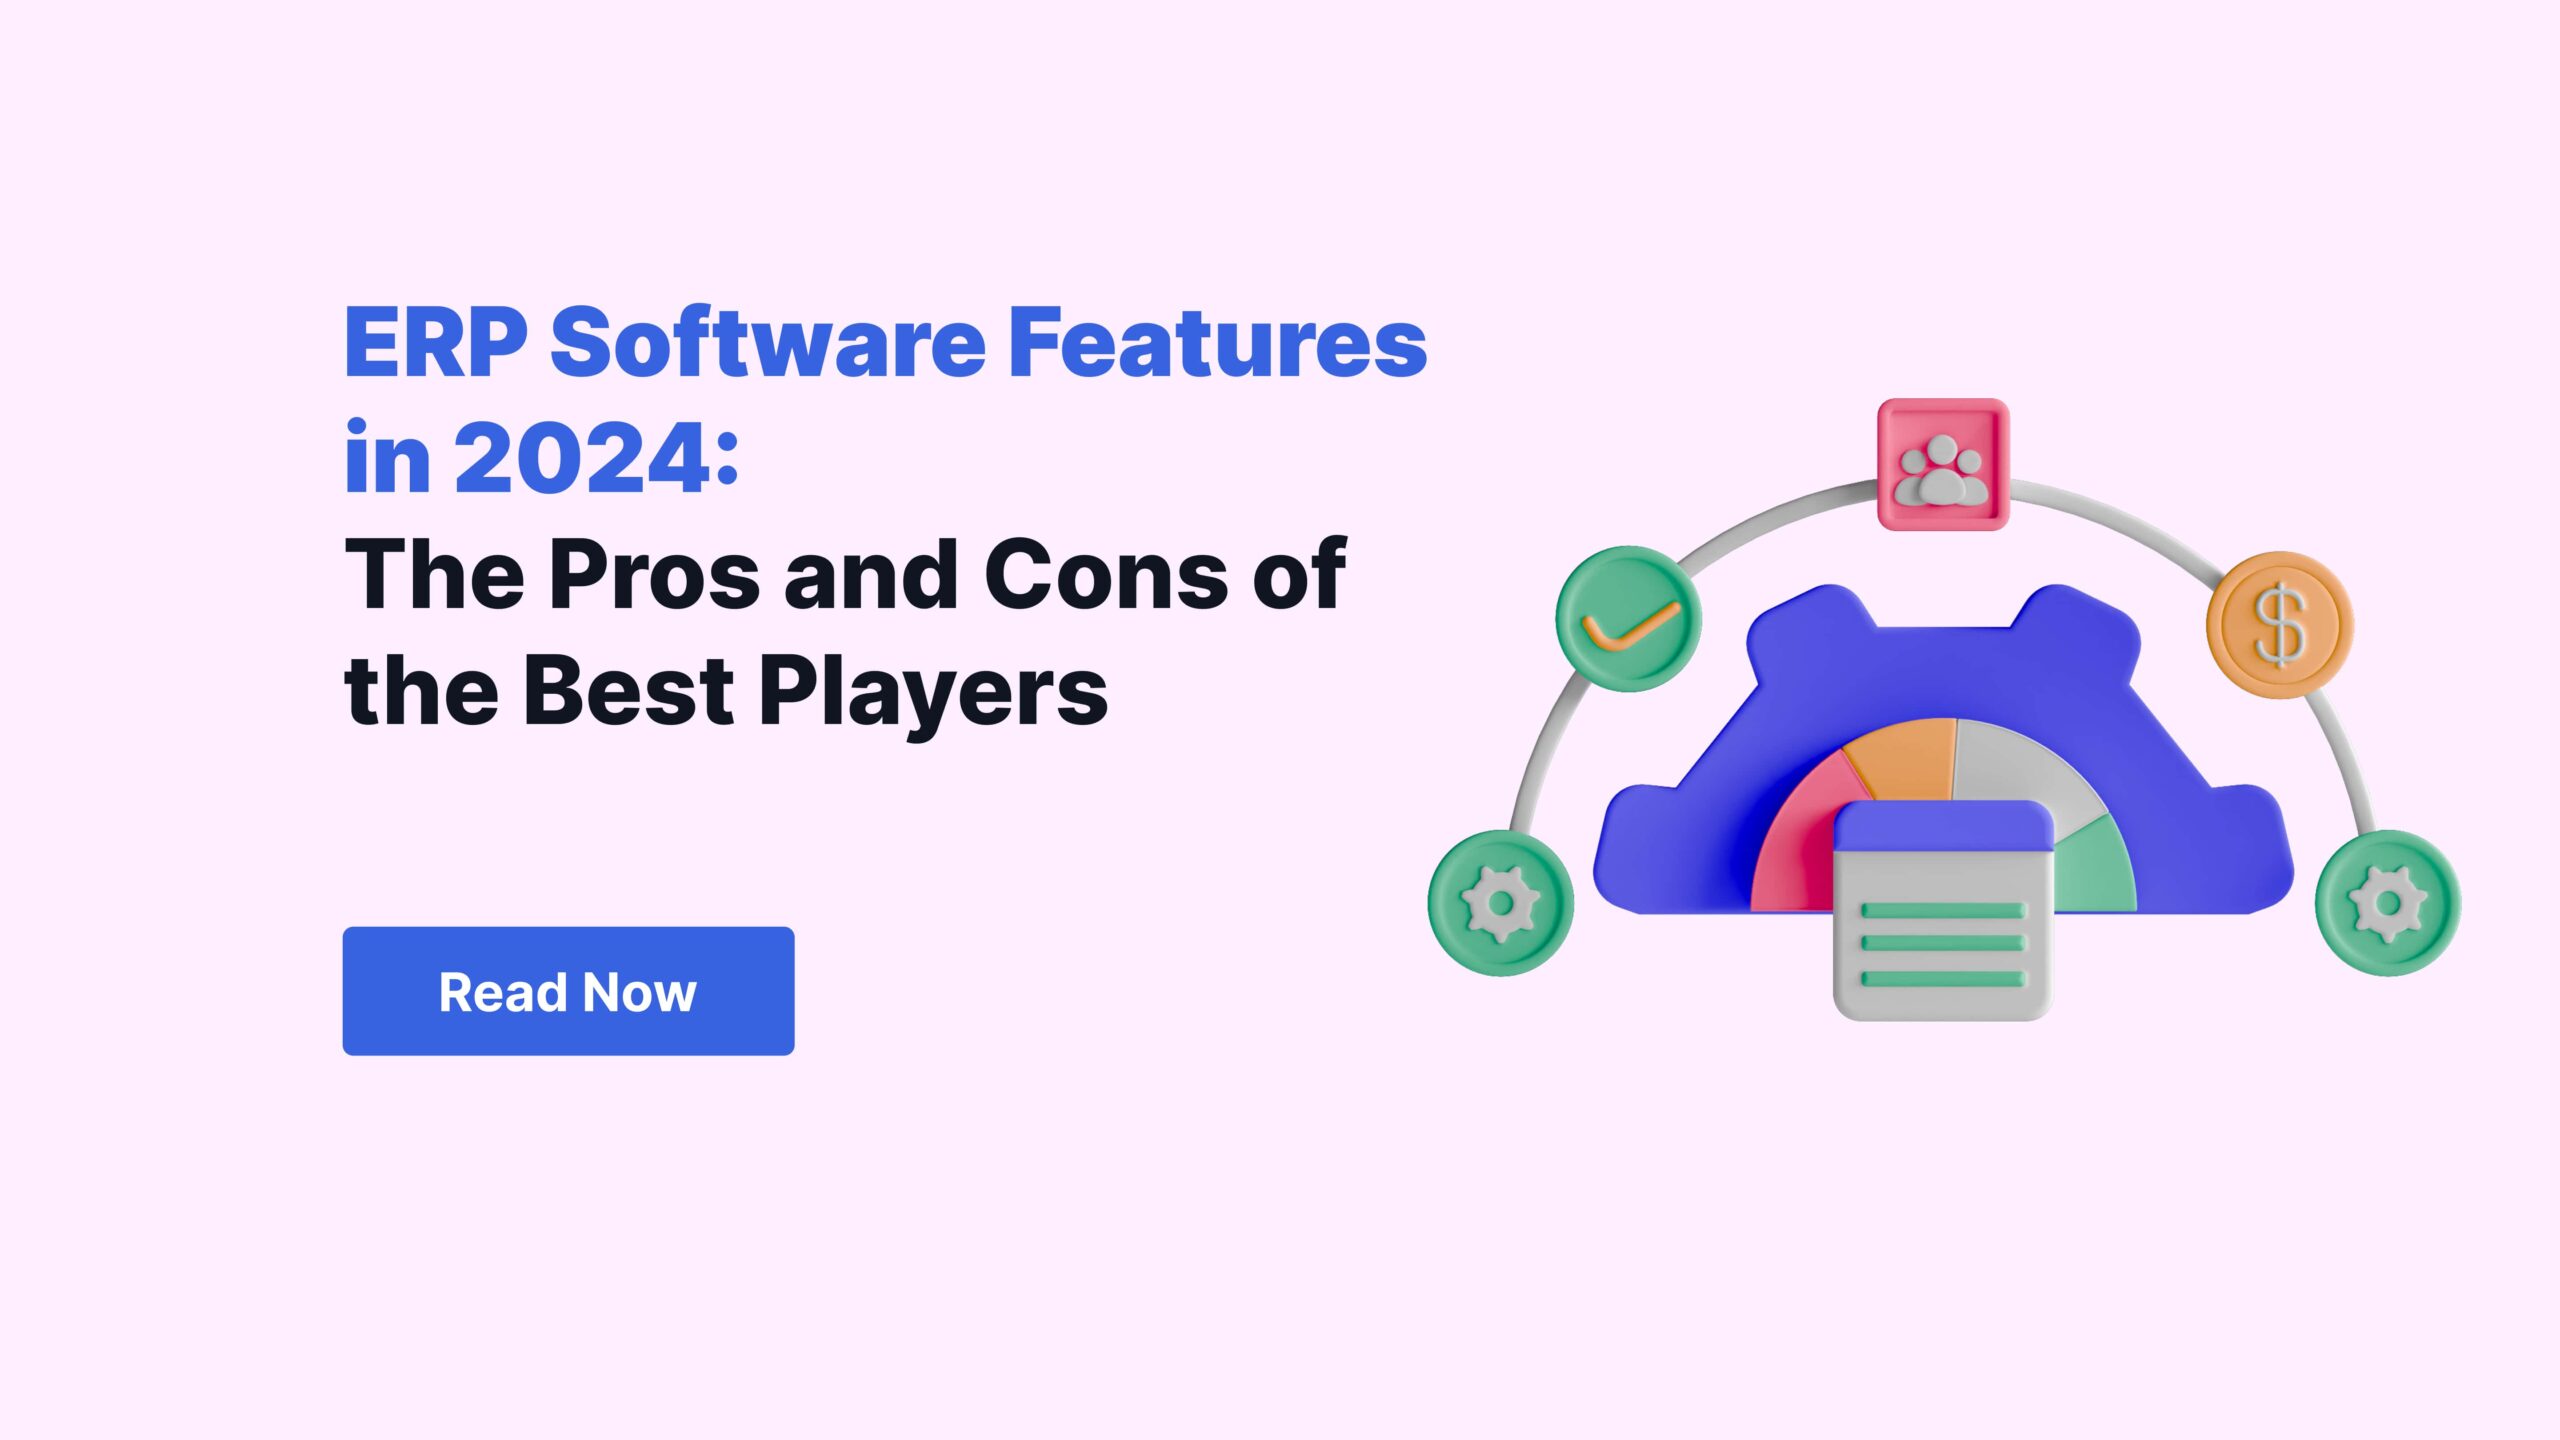 ERP Software Features in 2024 The Pros and Cons of the Best Players